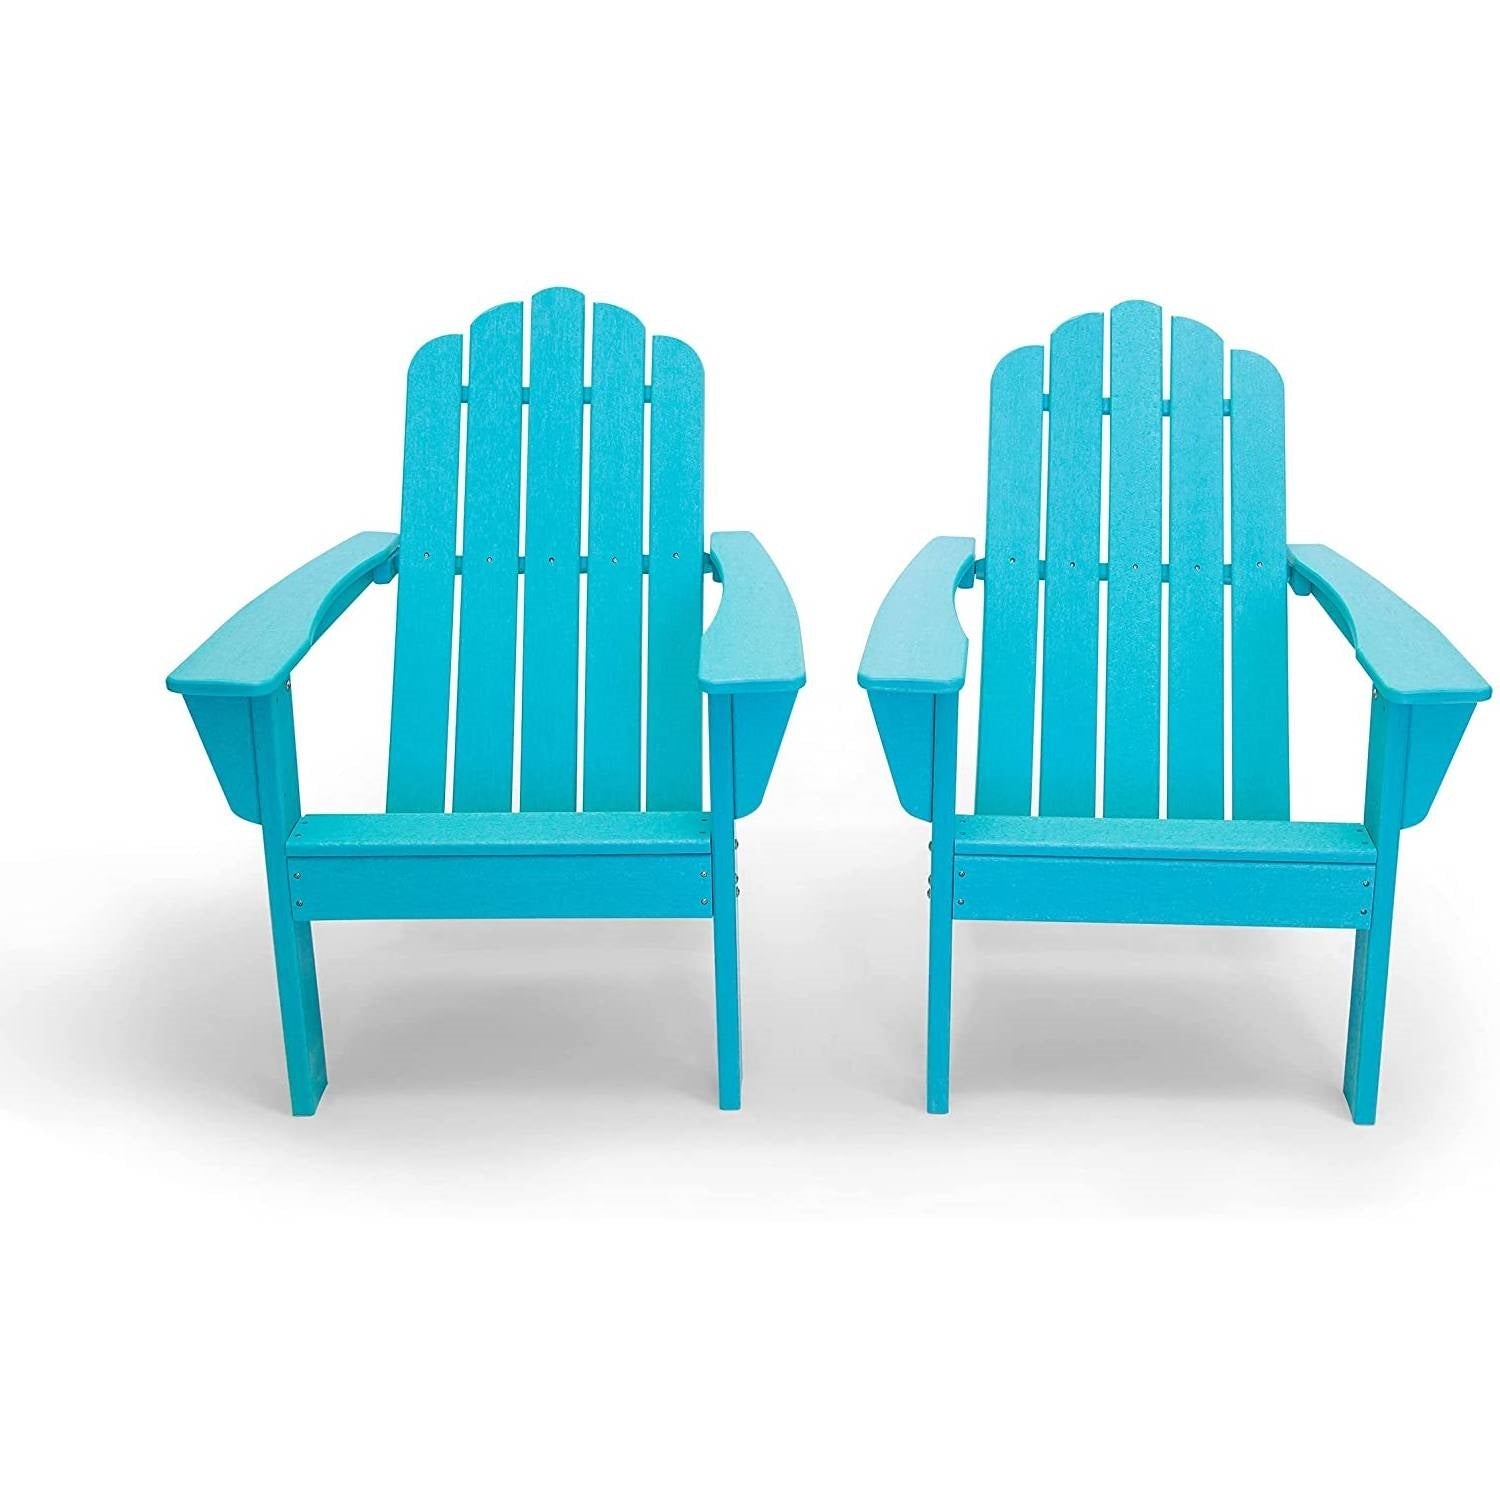 Outdoor > Outdoor Furniture > Adirondack Chairs - All Weather Recycled Blue Poly Plastic Outdoor Patio Adirondack Chairs - Set Of 2